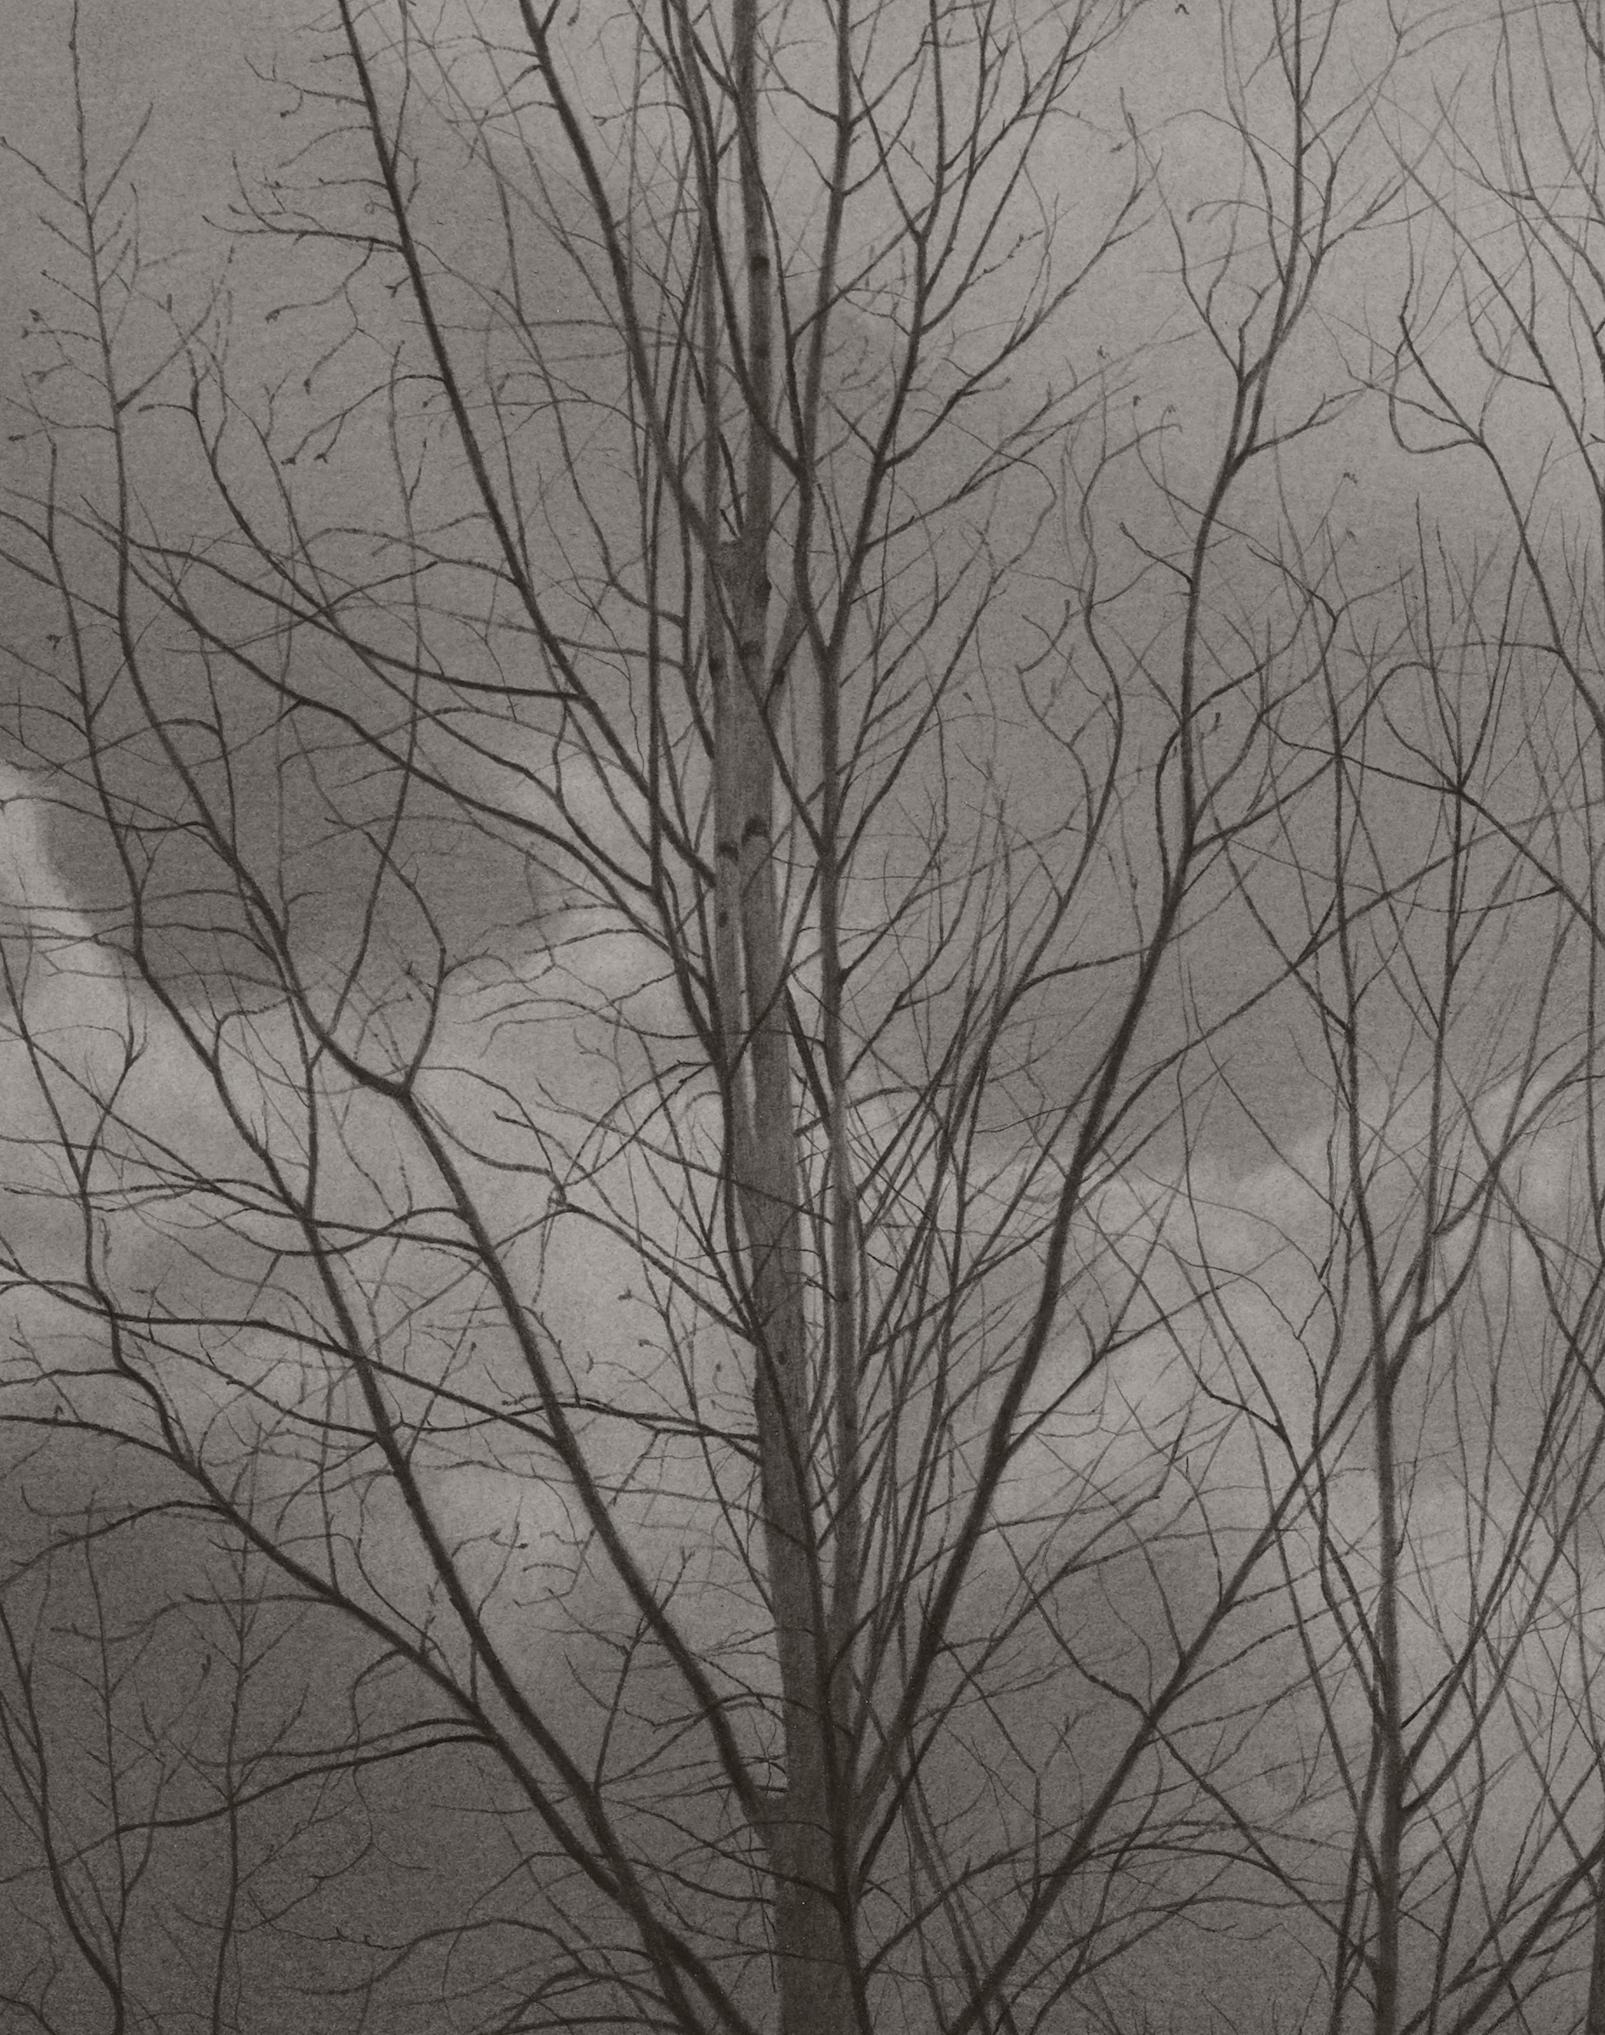 Bare Trees, gray photorealist graphite landscape drawing, 2019 - Photorealist Art by Mary Reilly